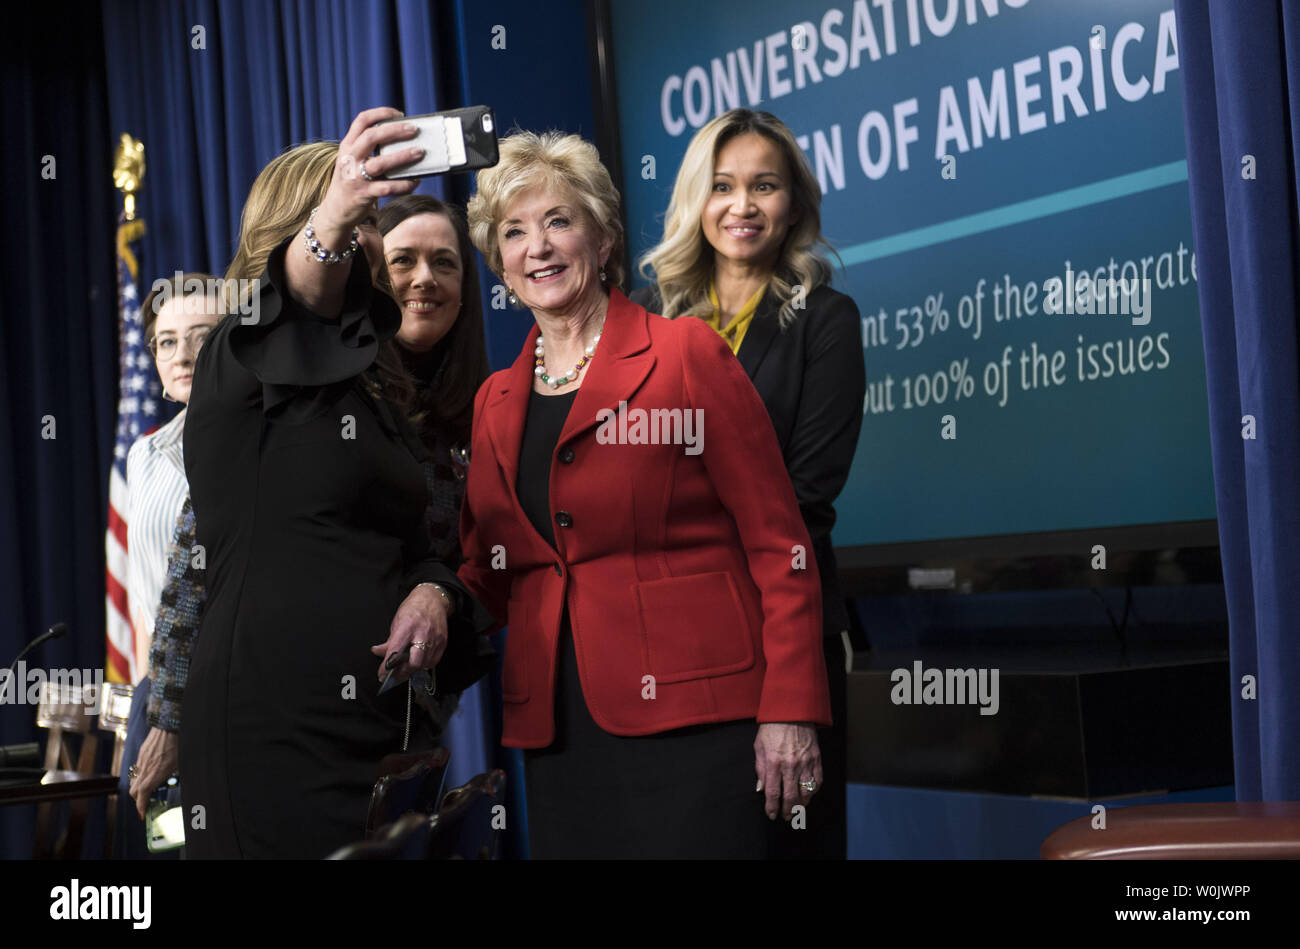 Small Business Administrator Linda McMahon poses with audience members following a panel titled Conversations with the Women of America, on the Trump Administration's efforts to improve the lives or women at home and in the workplace, in the Eisenhower Executive Office Building in Washington, D.C. on January 16, 2017. The multipart panel allowed panel participants to ask questions to members of the Administration on the economy, healthcare, combatting the opioid crisis and national security. Photo by Kevin Dietsch/UPI Stock Photo